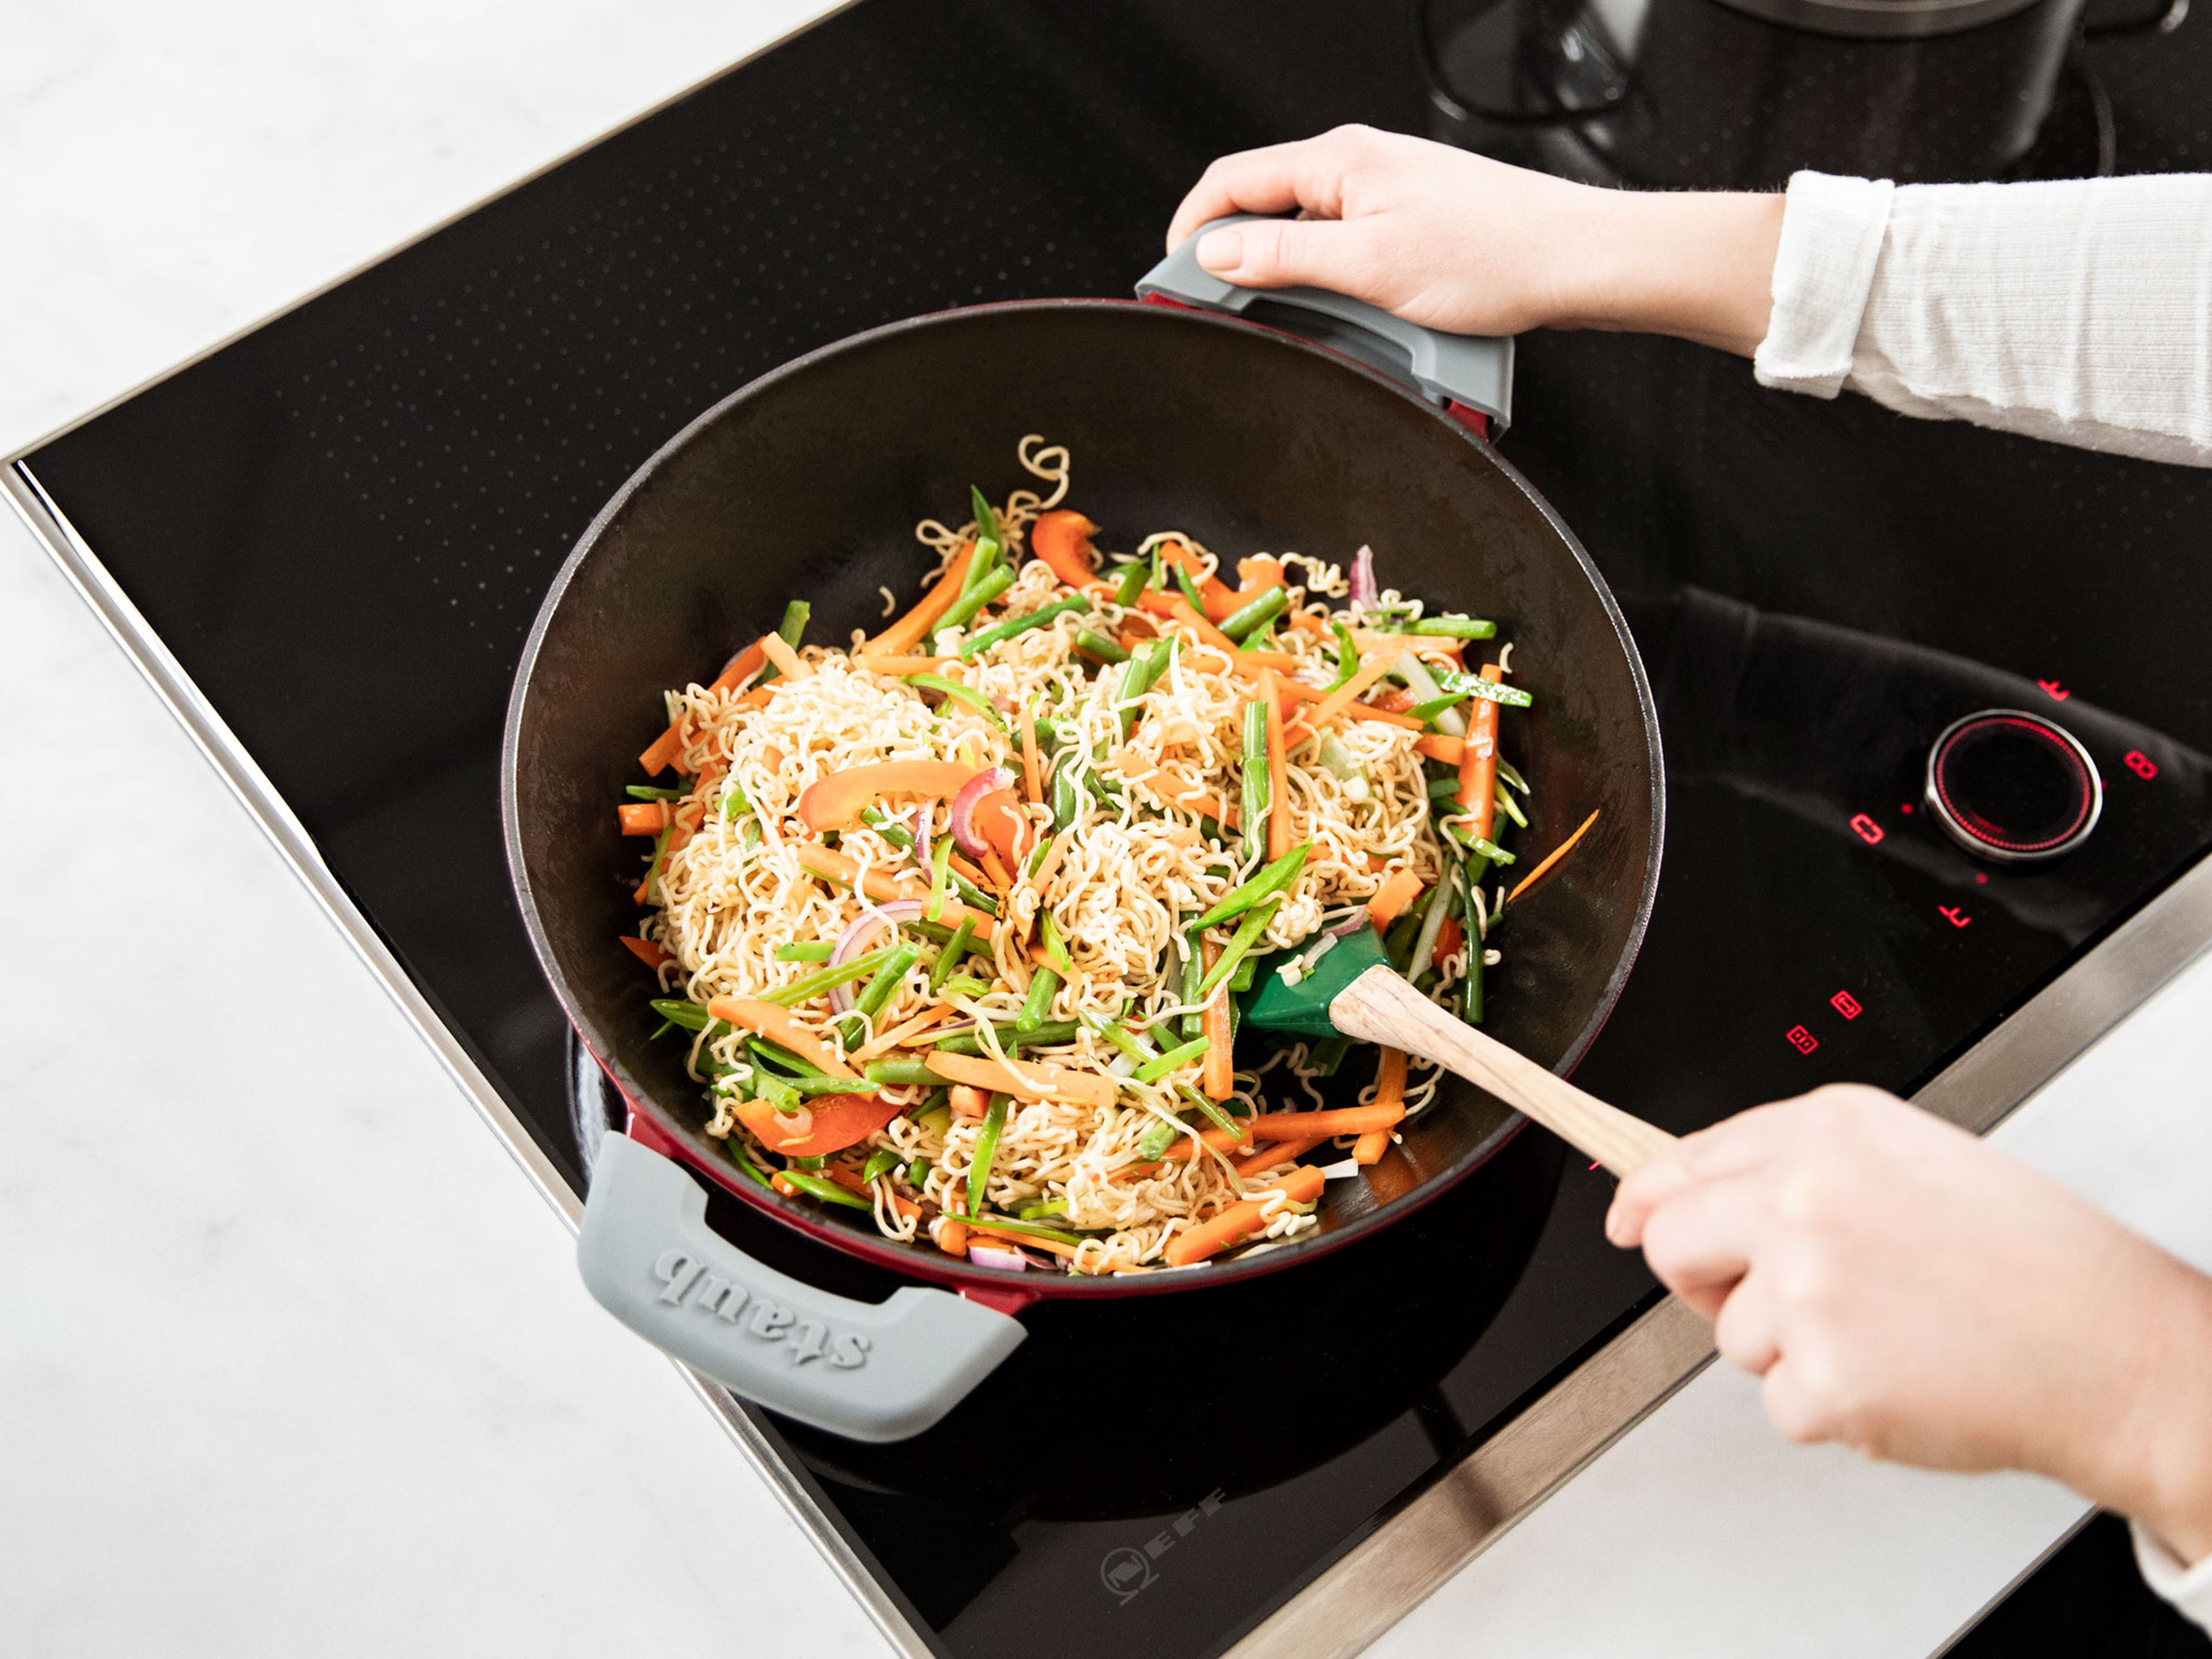 Heat sesame oil in a wok, add the noodles, and stir-fry on high heat until browned, approx. 4 min. Add the vegetables to the noodles and fry approx. 5 - 7 min, tossing often.